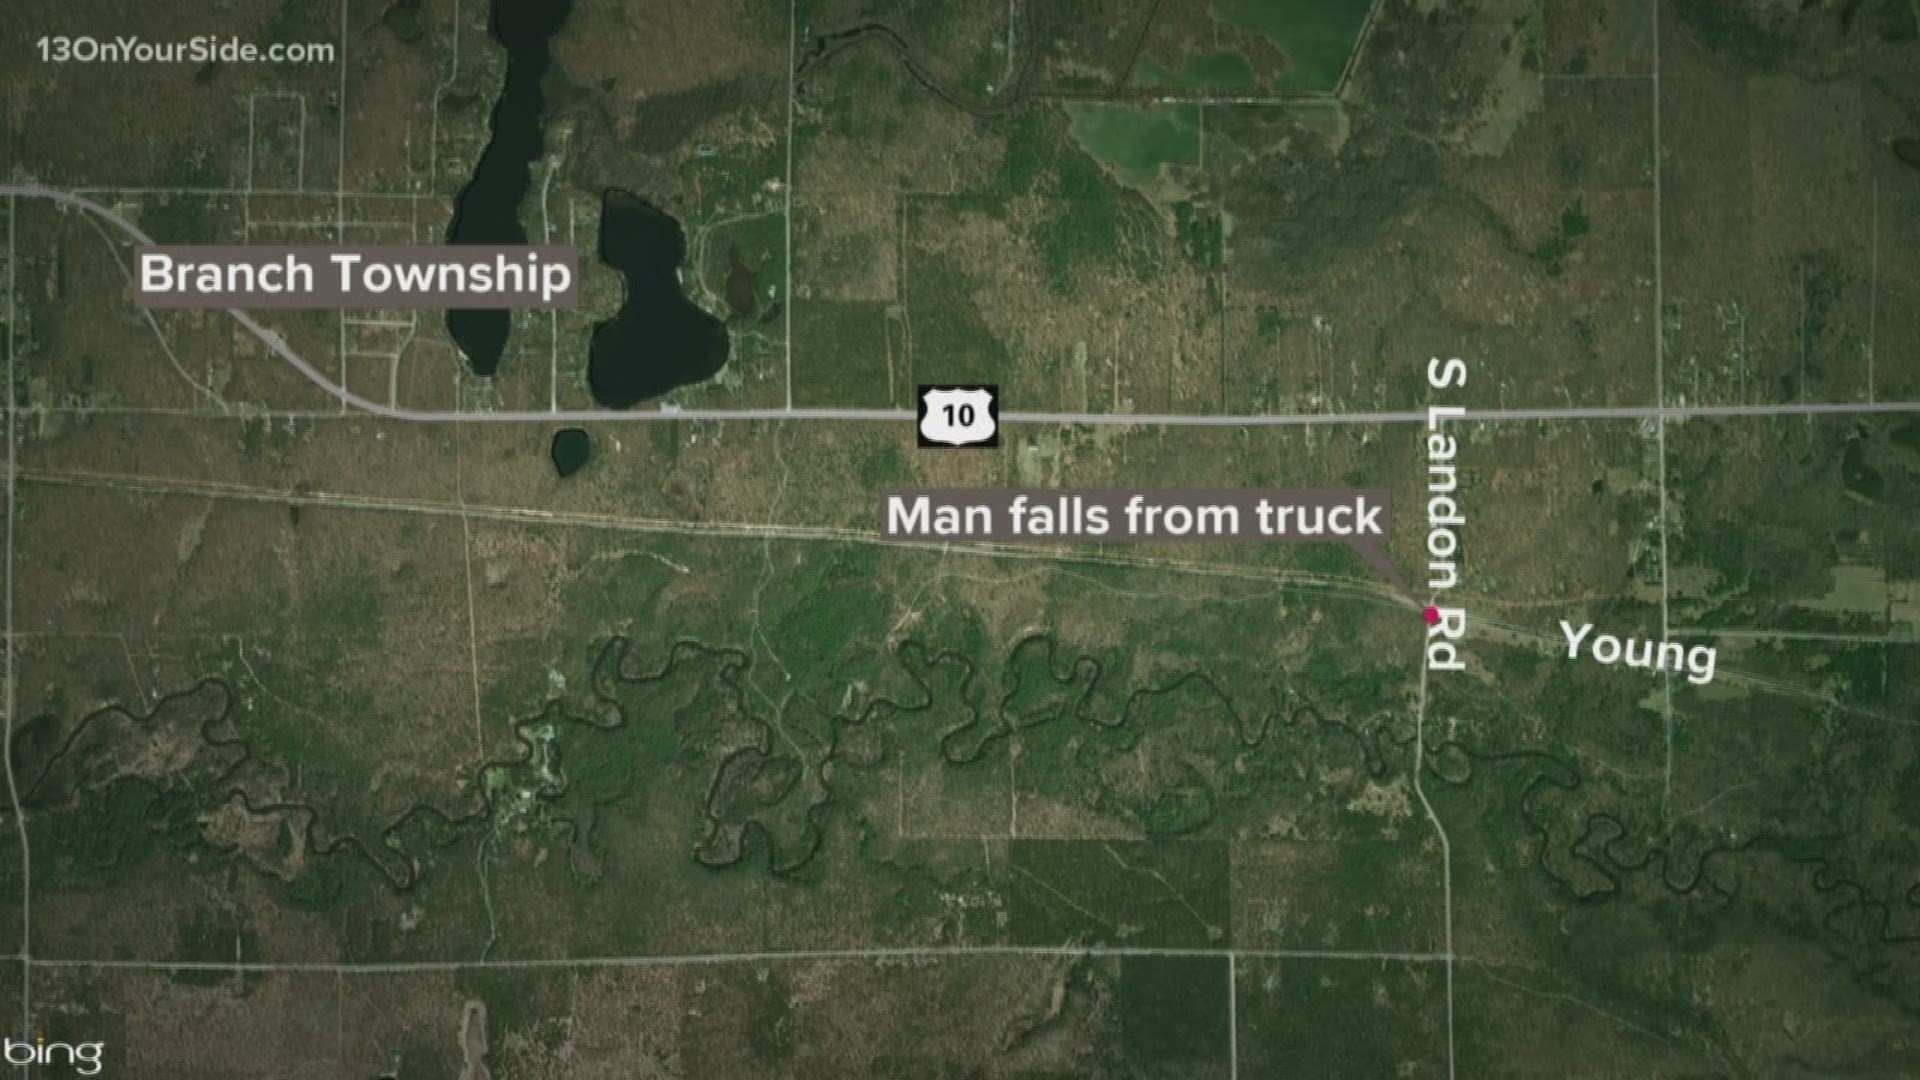 The Mason County Sheriff's Office have identified the man who died after falling off a pickup truck over the weekend and hitting his head on the pavement. The sheriff's office say 47-year-old William Dingman from Crystal, Michigan was the victim in the incident.